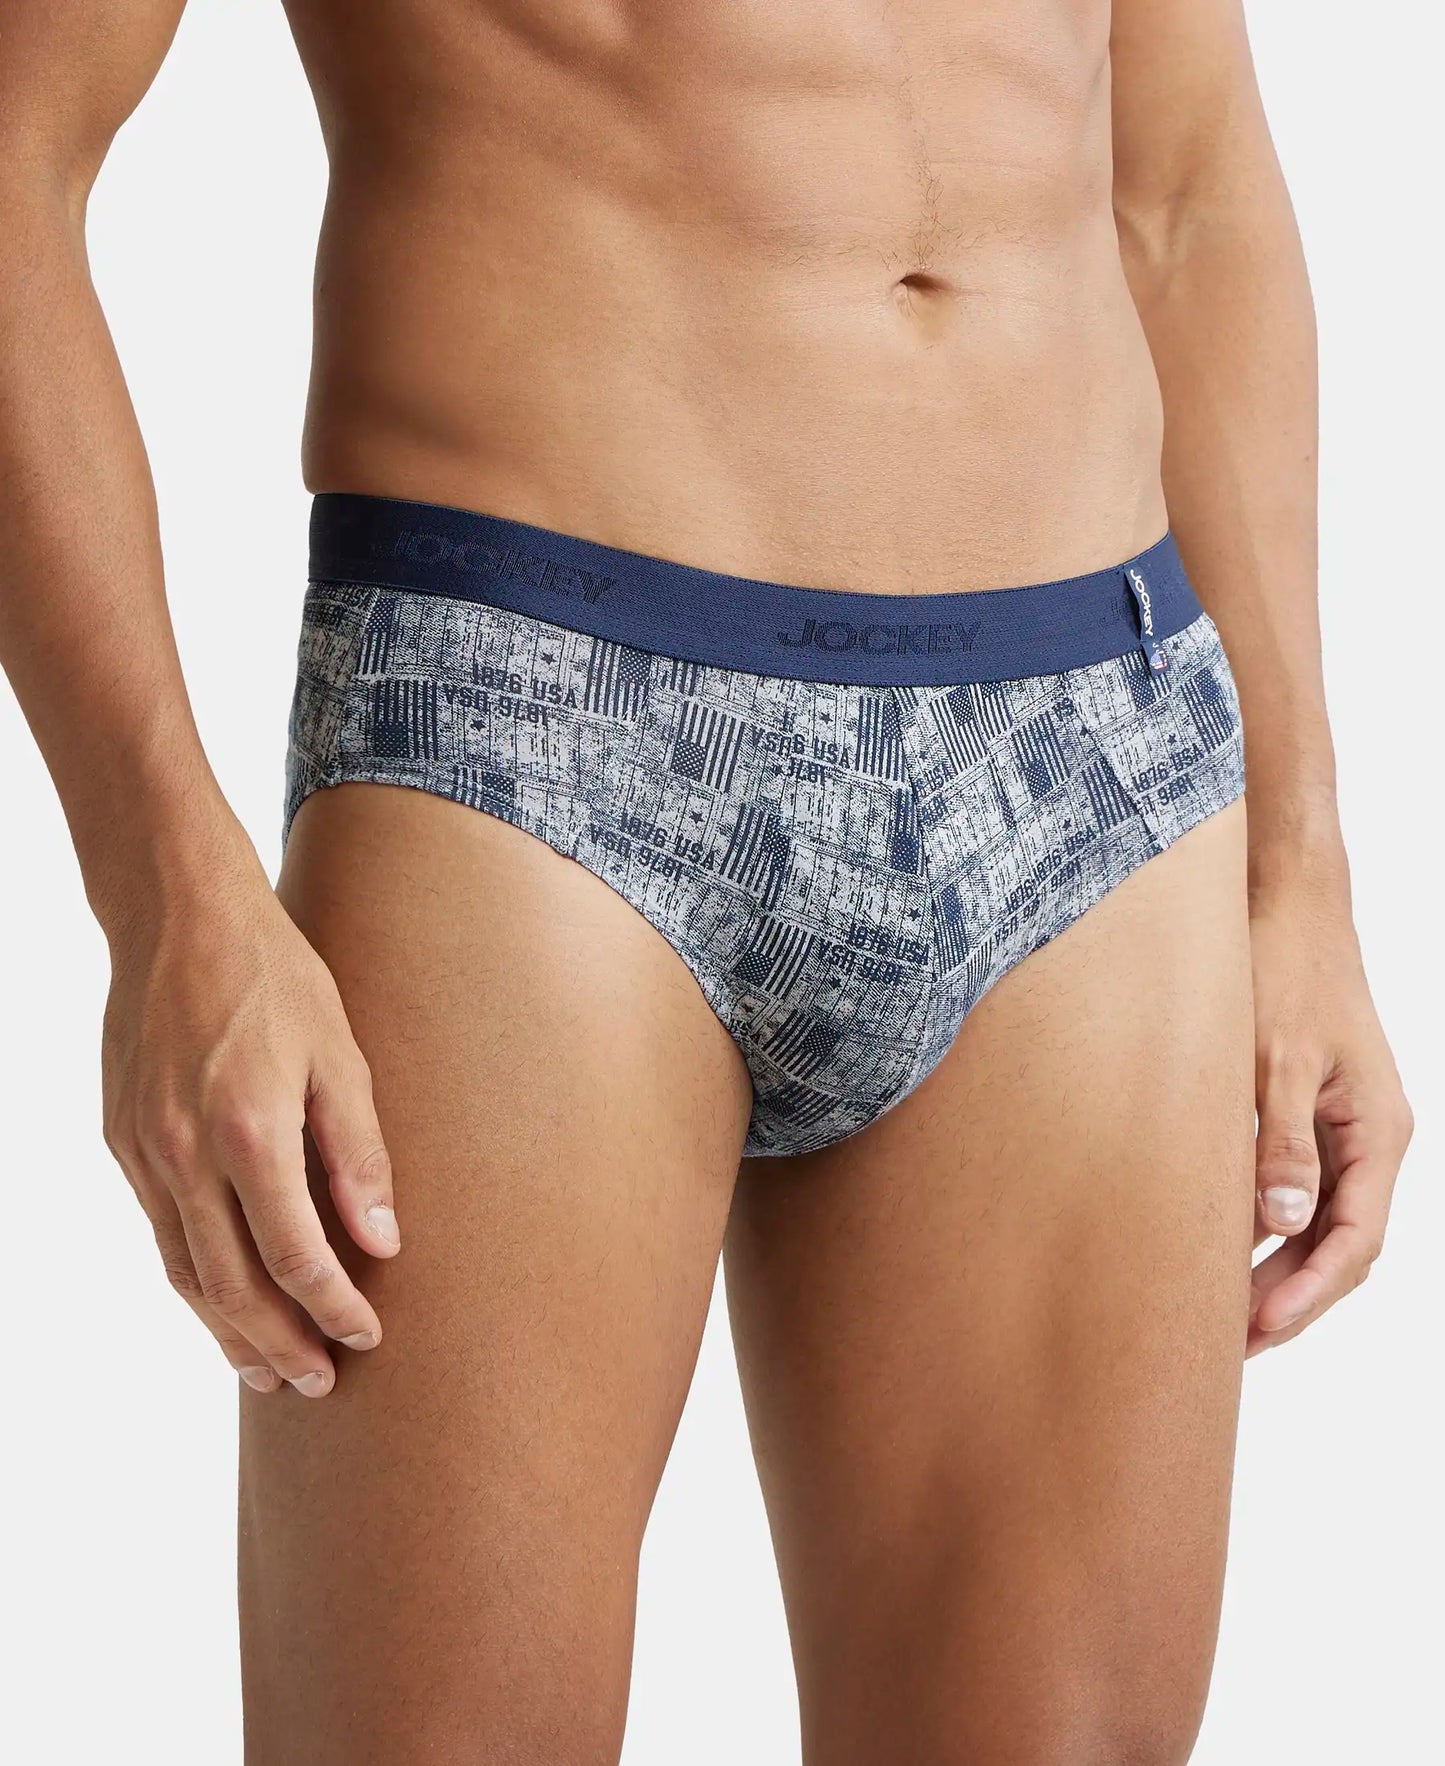 Super Combed Cotton Printed Brief with Ultrasoft Waistband - Navy Nickle-4